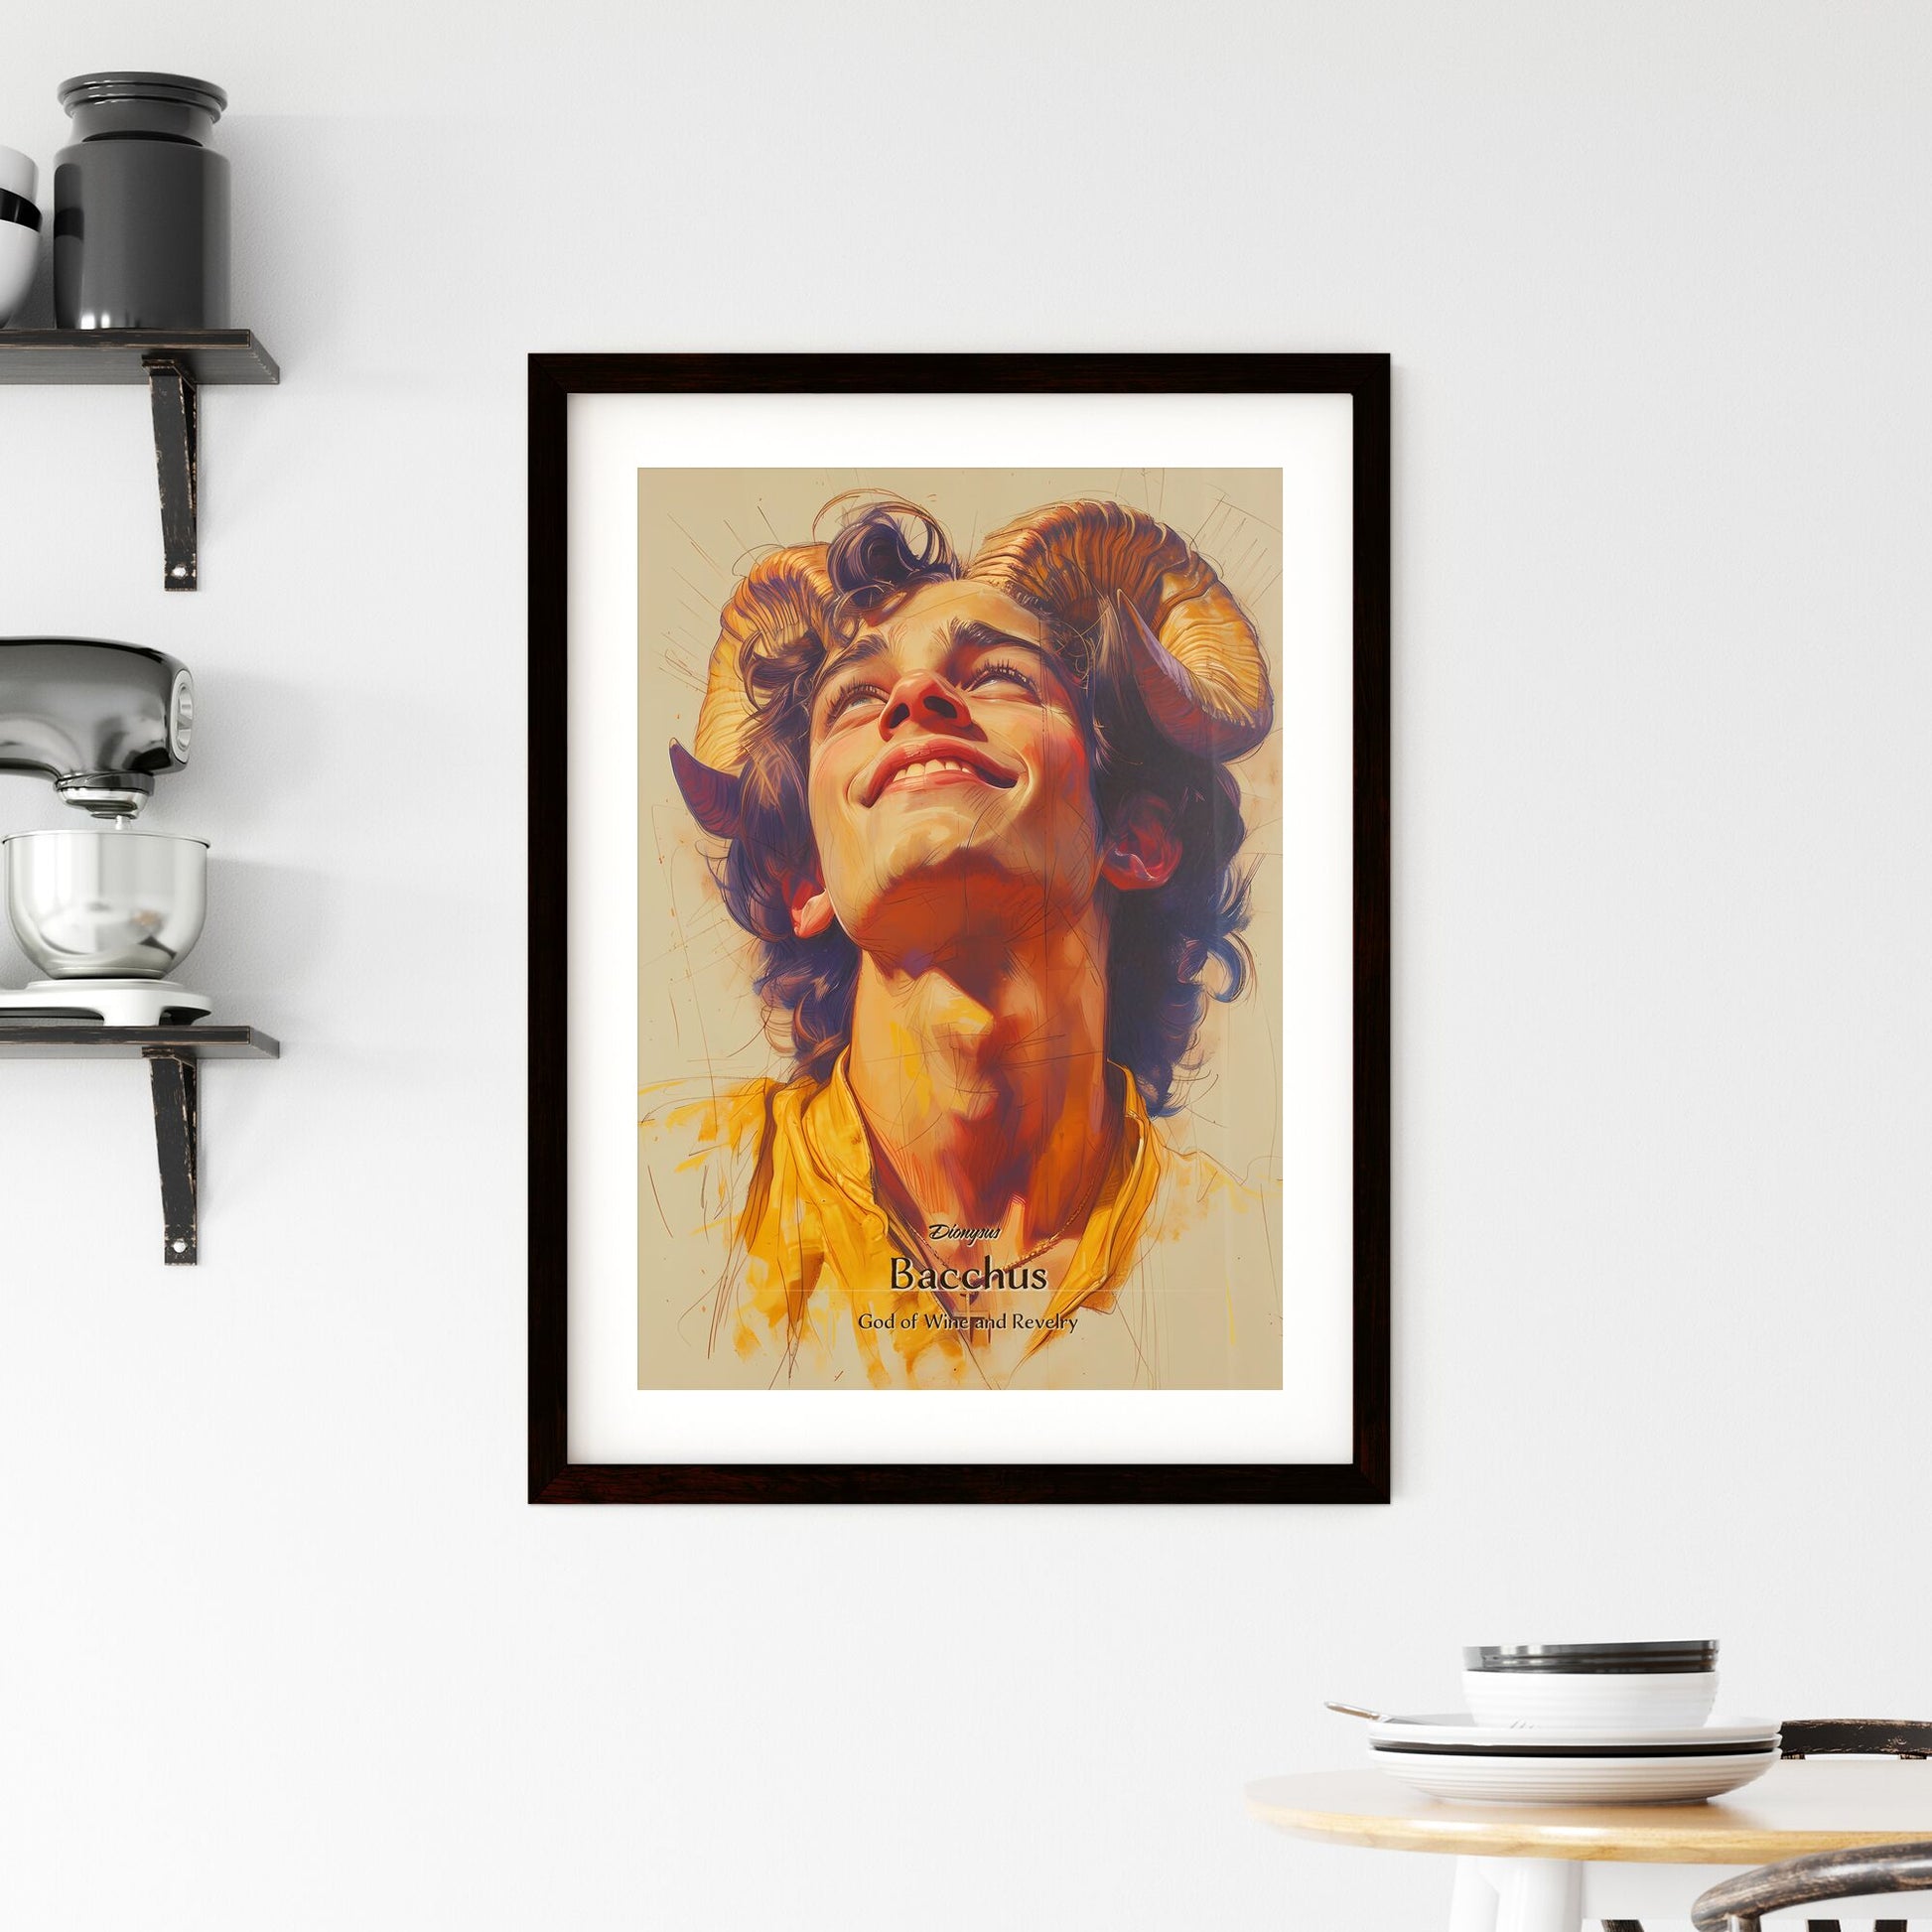 Dionysus, Bacchus, God of Wine and Revelry, A Poster of a man with horns looking up Default Title